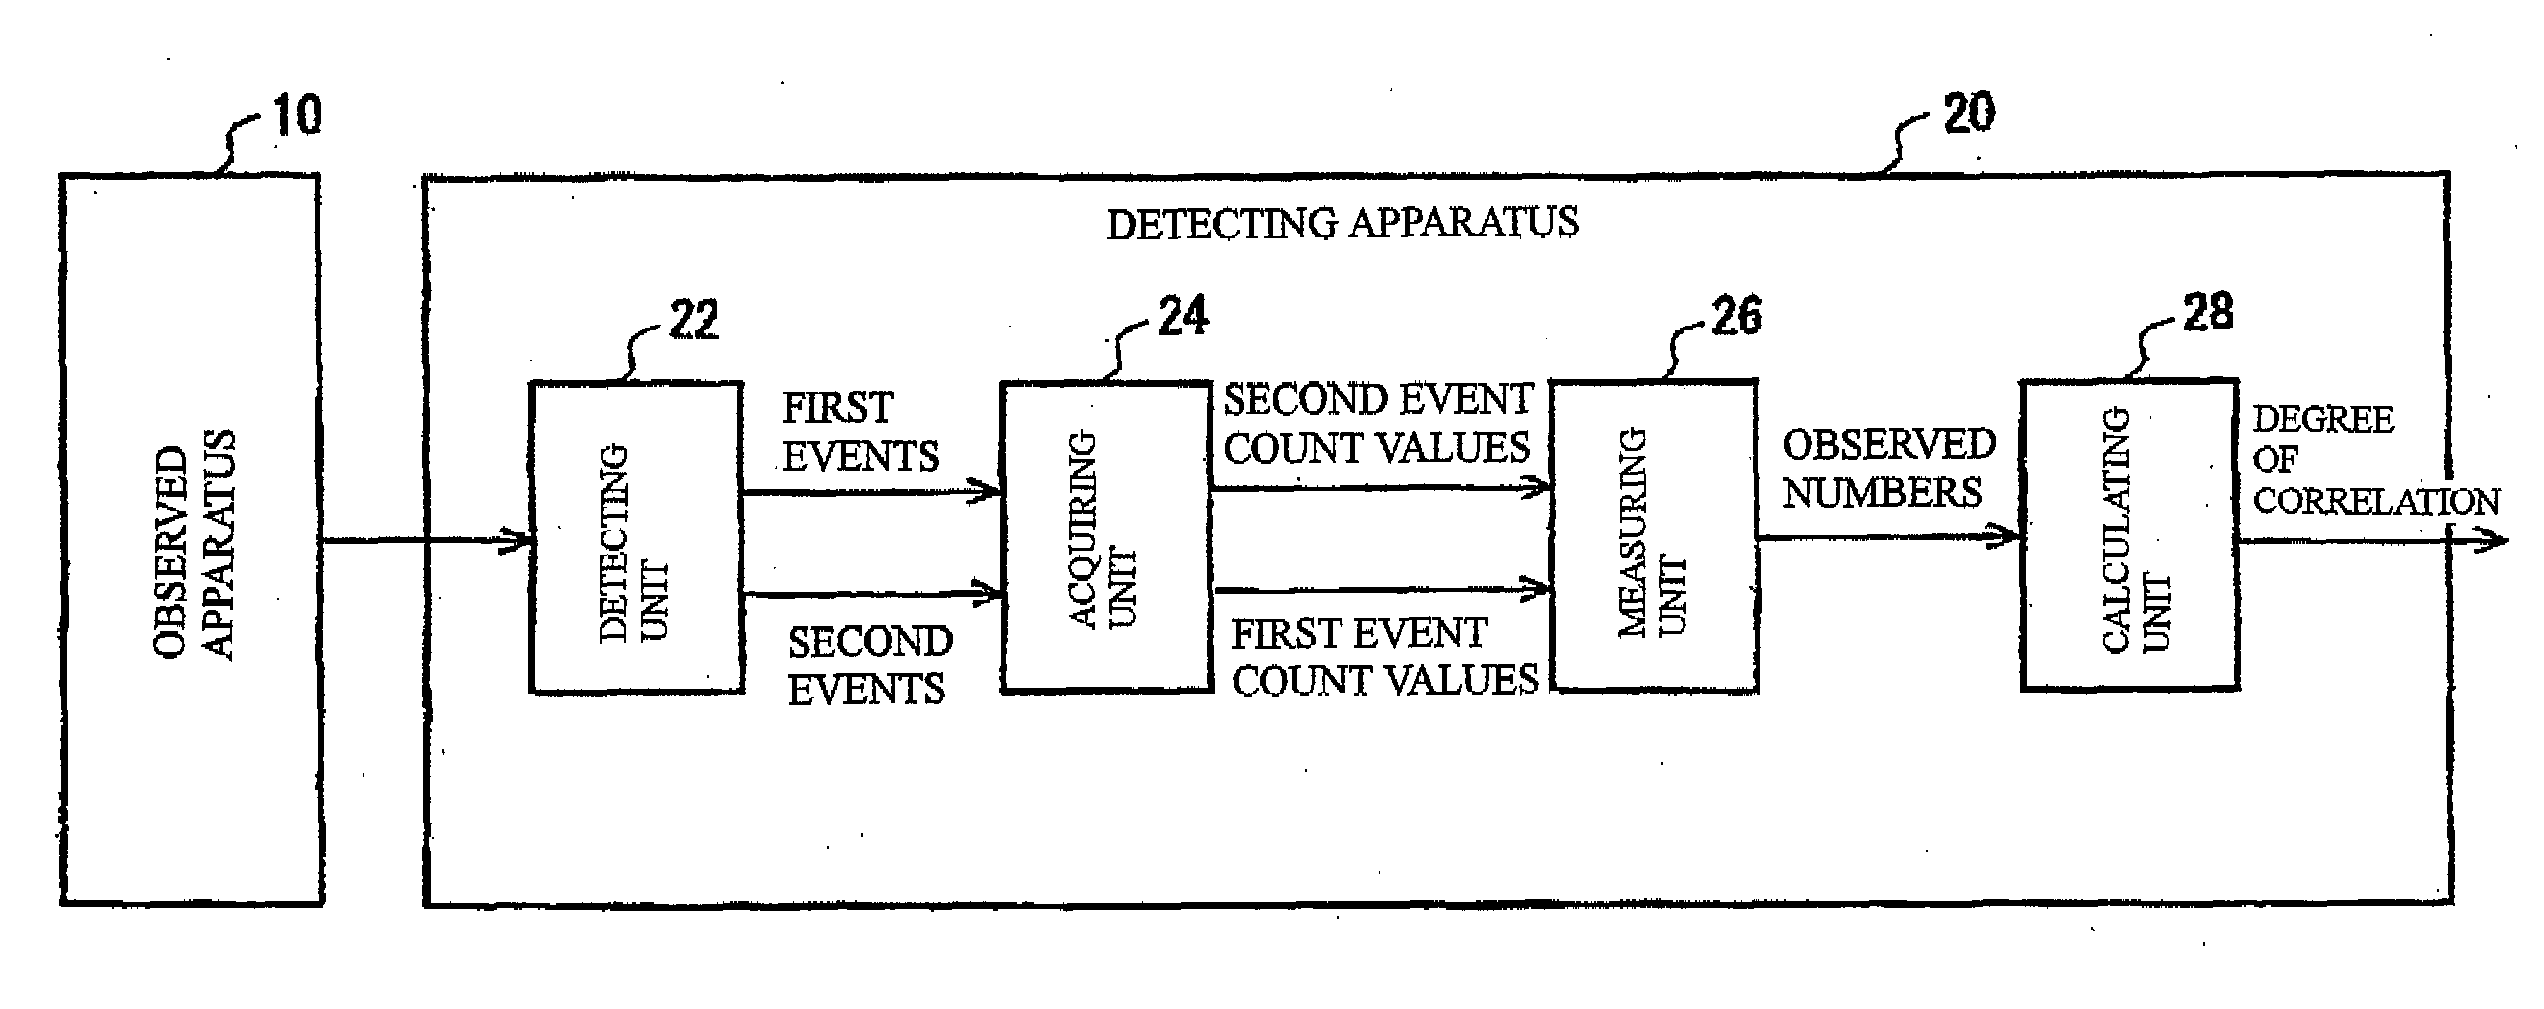 Method, Apparatus, and Program for Detecting the Correlation Between Repeating Events